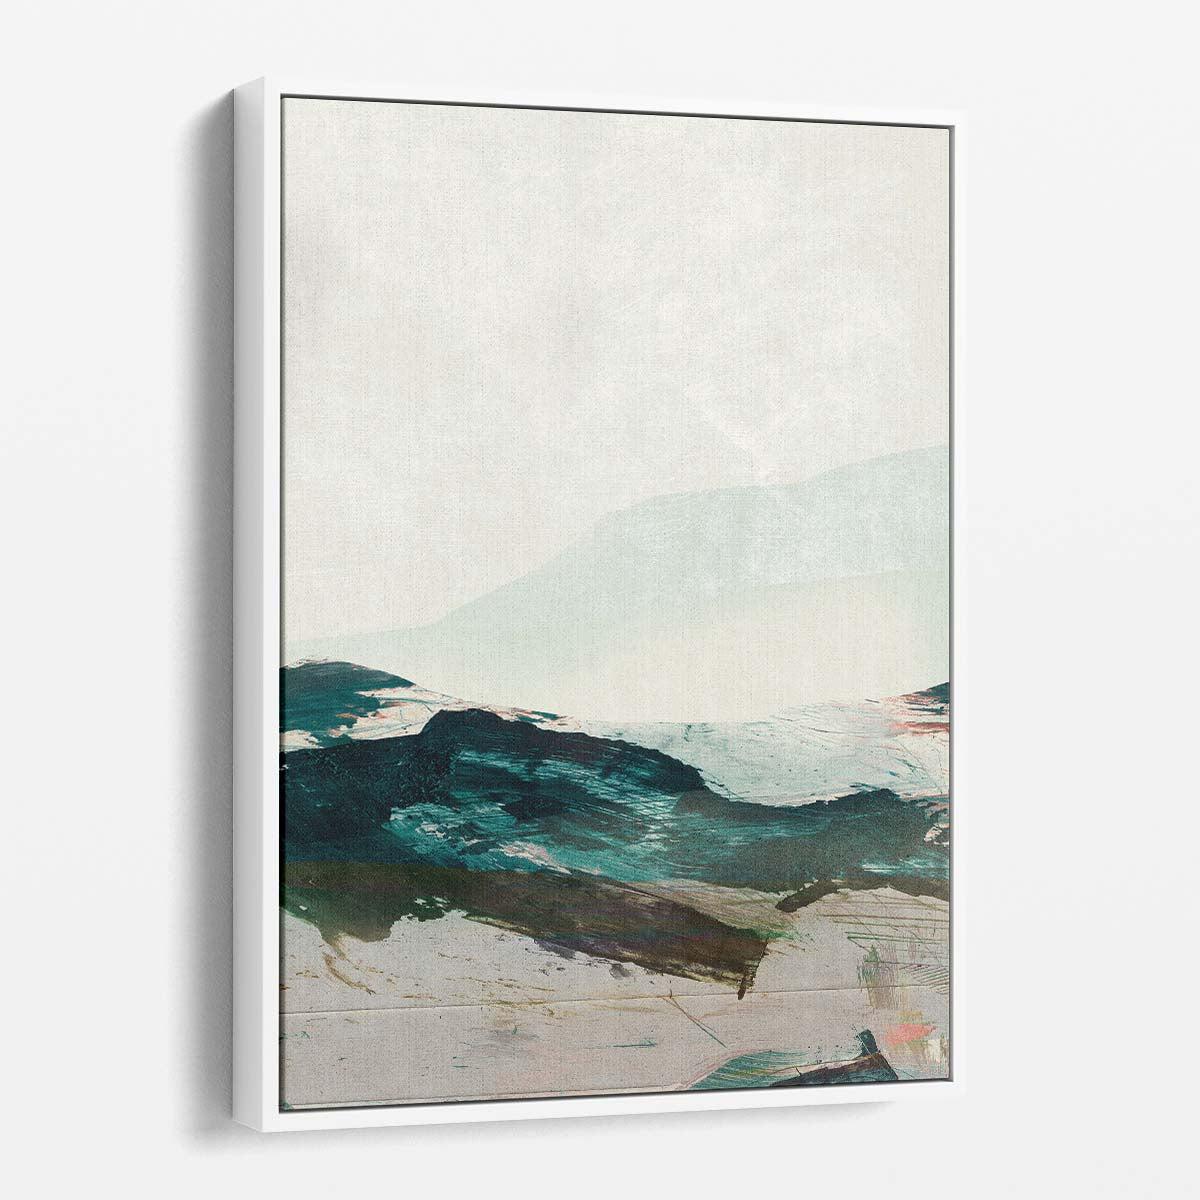 Dan Hobday's Modern Minimalistic Abstract Mountain Landscape Illustration by Luxuriance Designs, made in USA